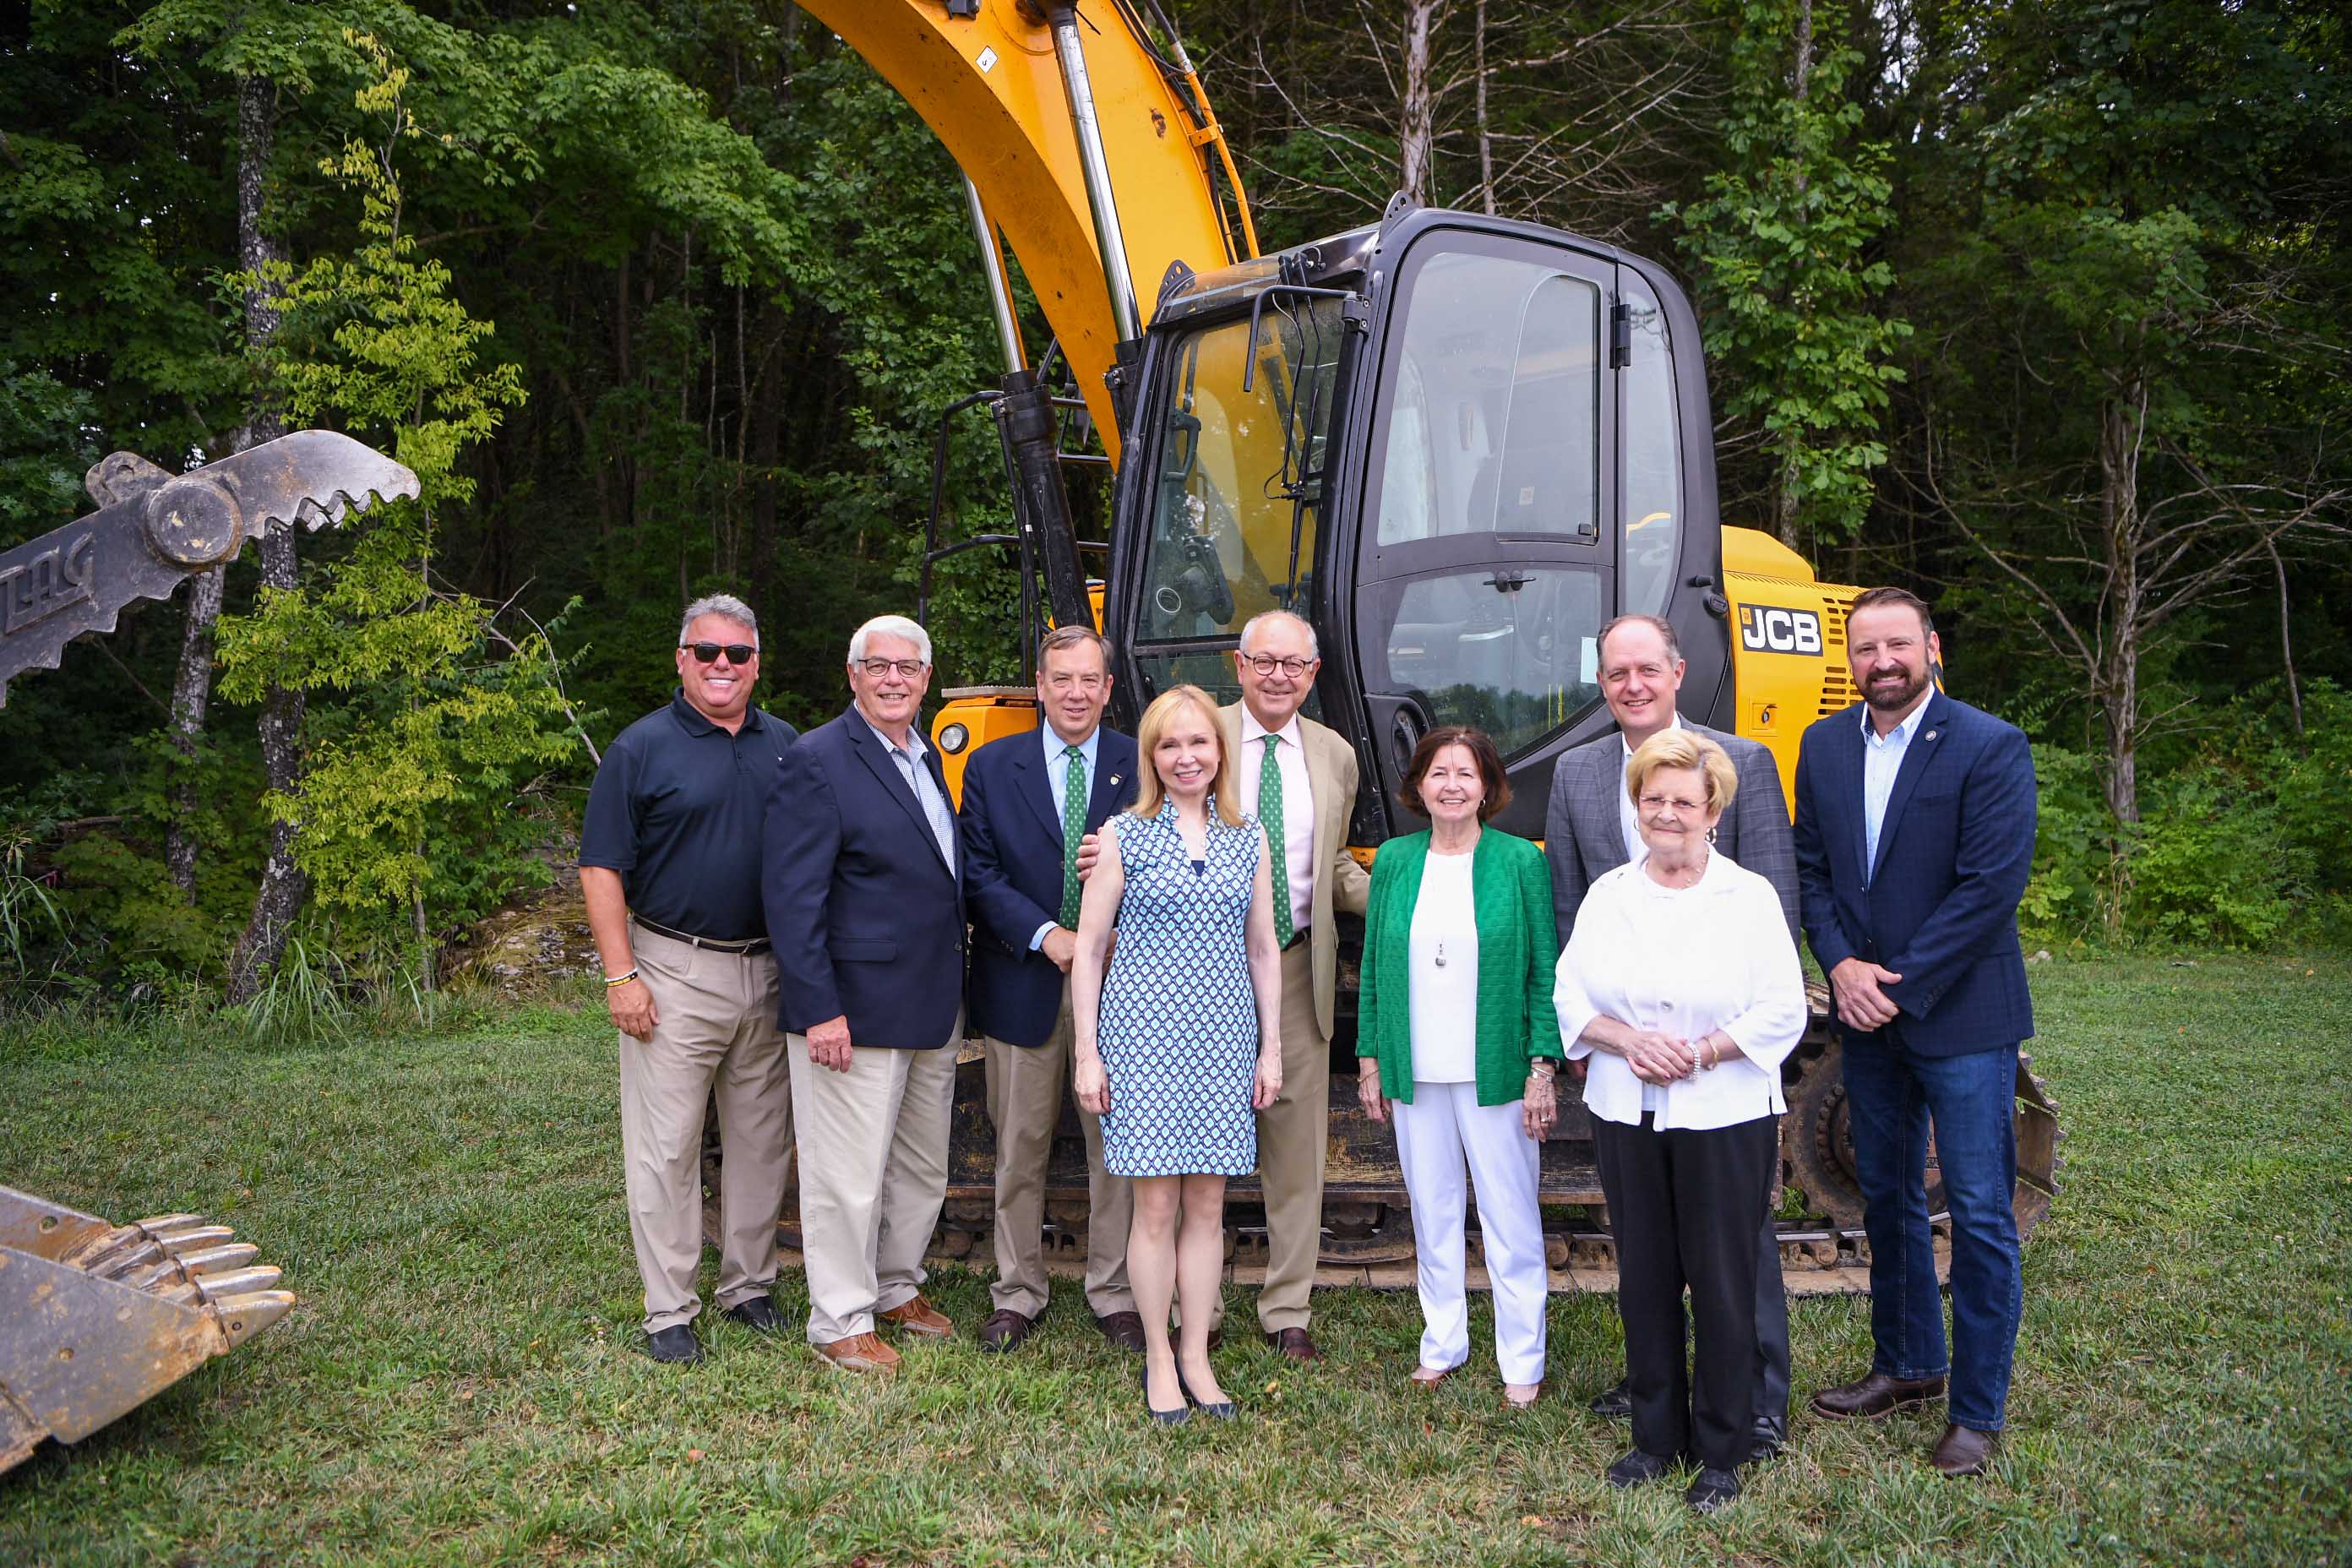 Group stands with excavator